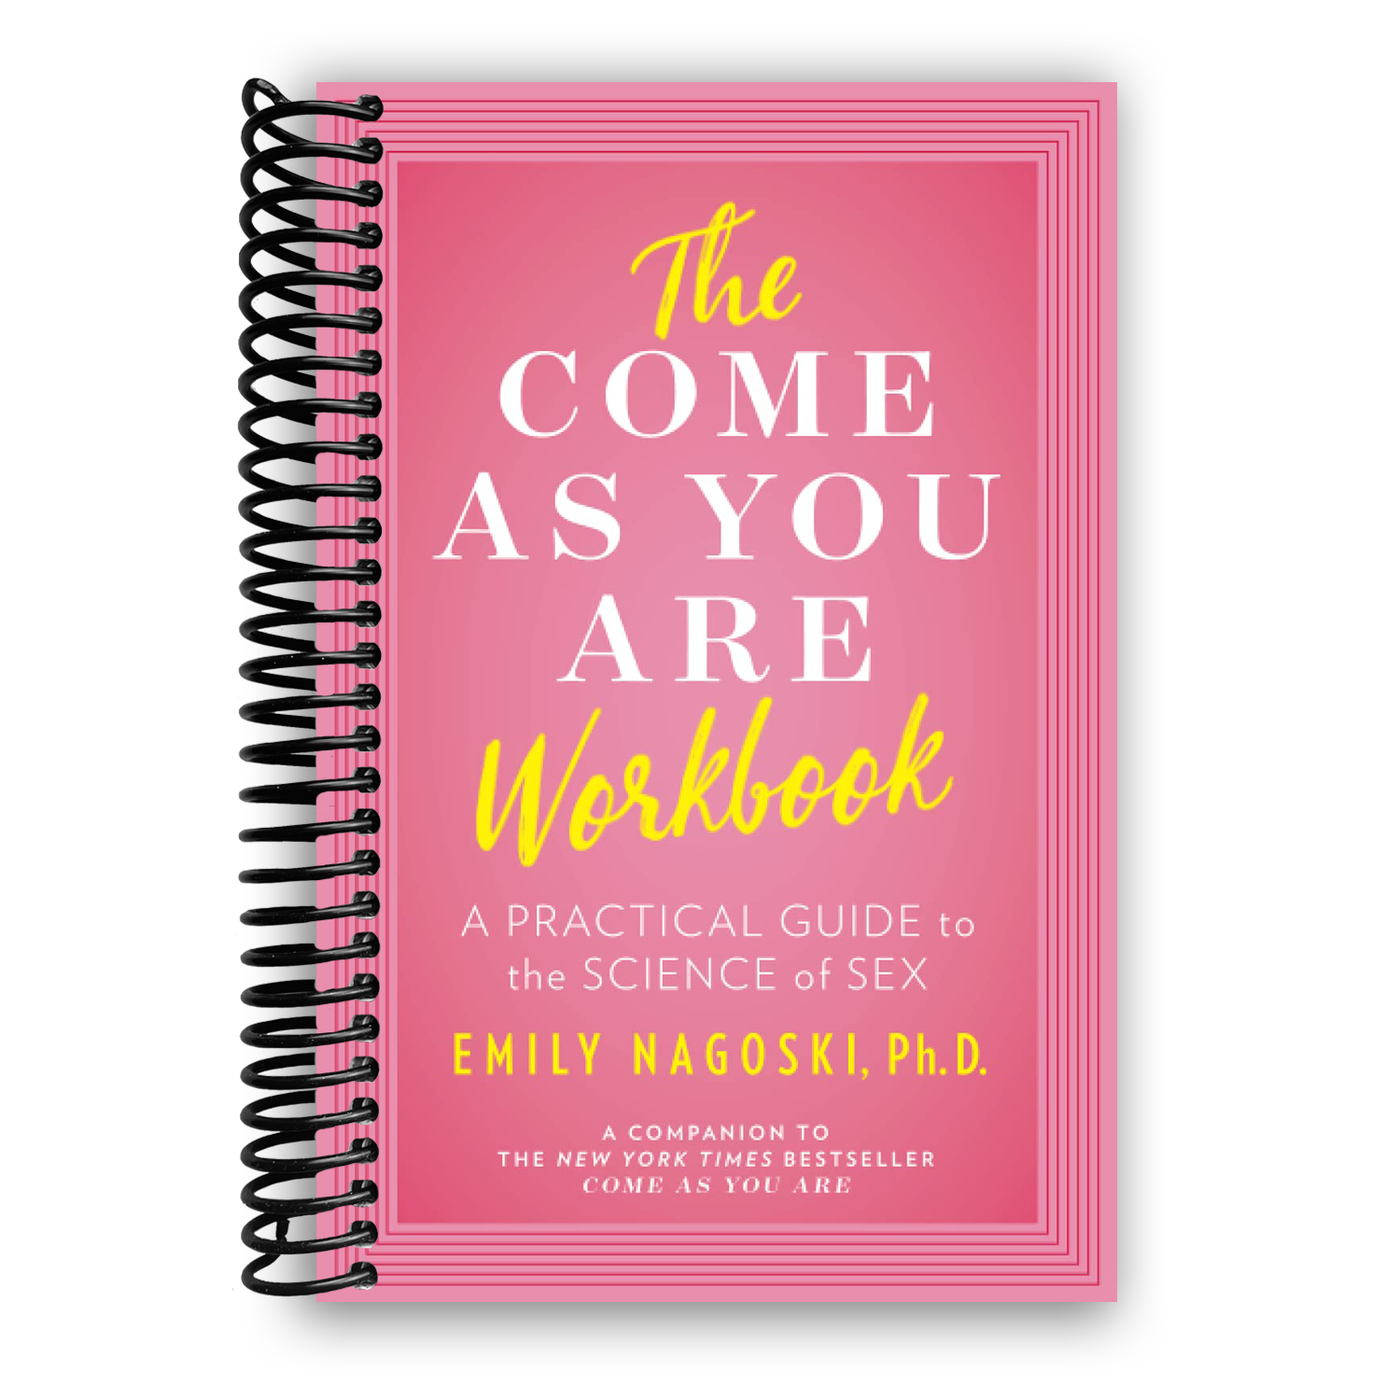 The Come As You Are Workbook: a practical guide to the science of sex (Spiral Bound)